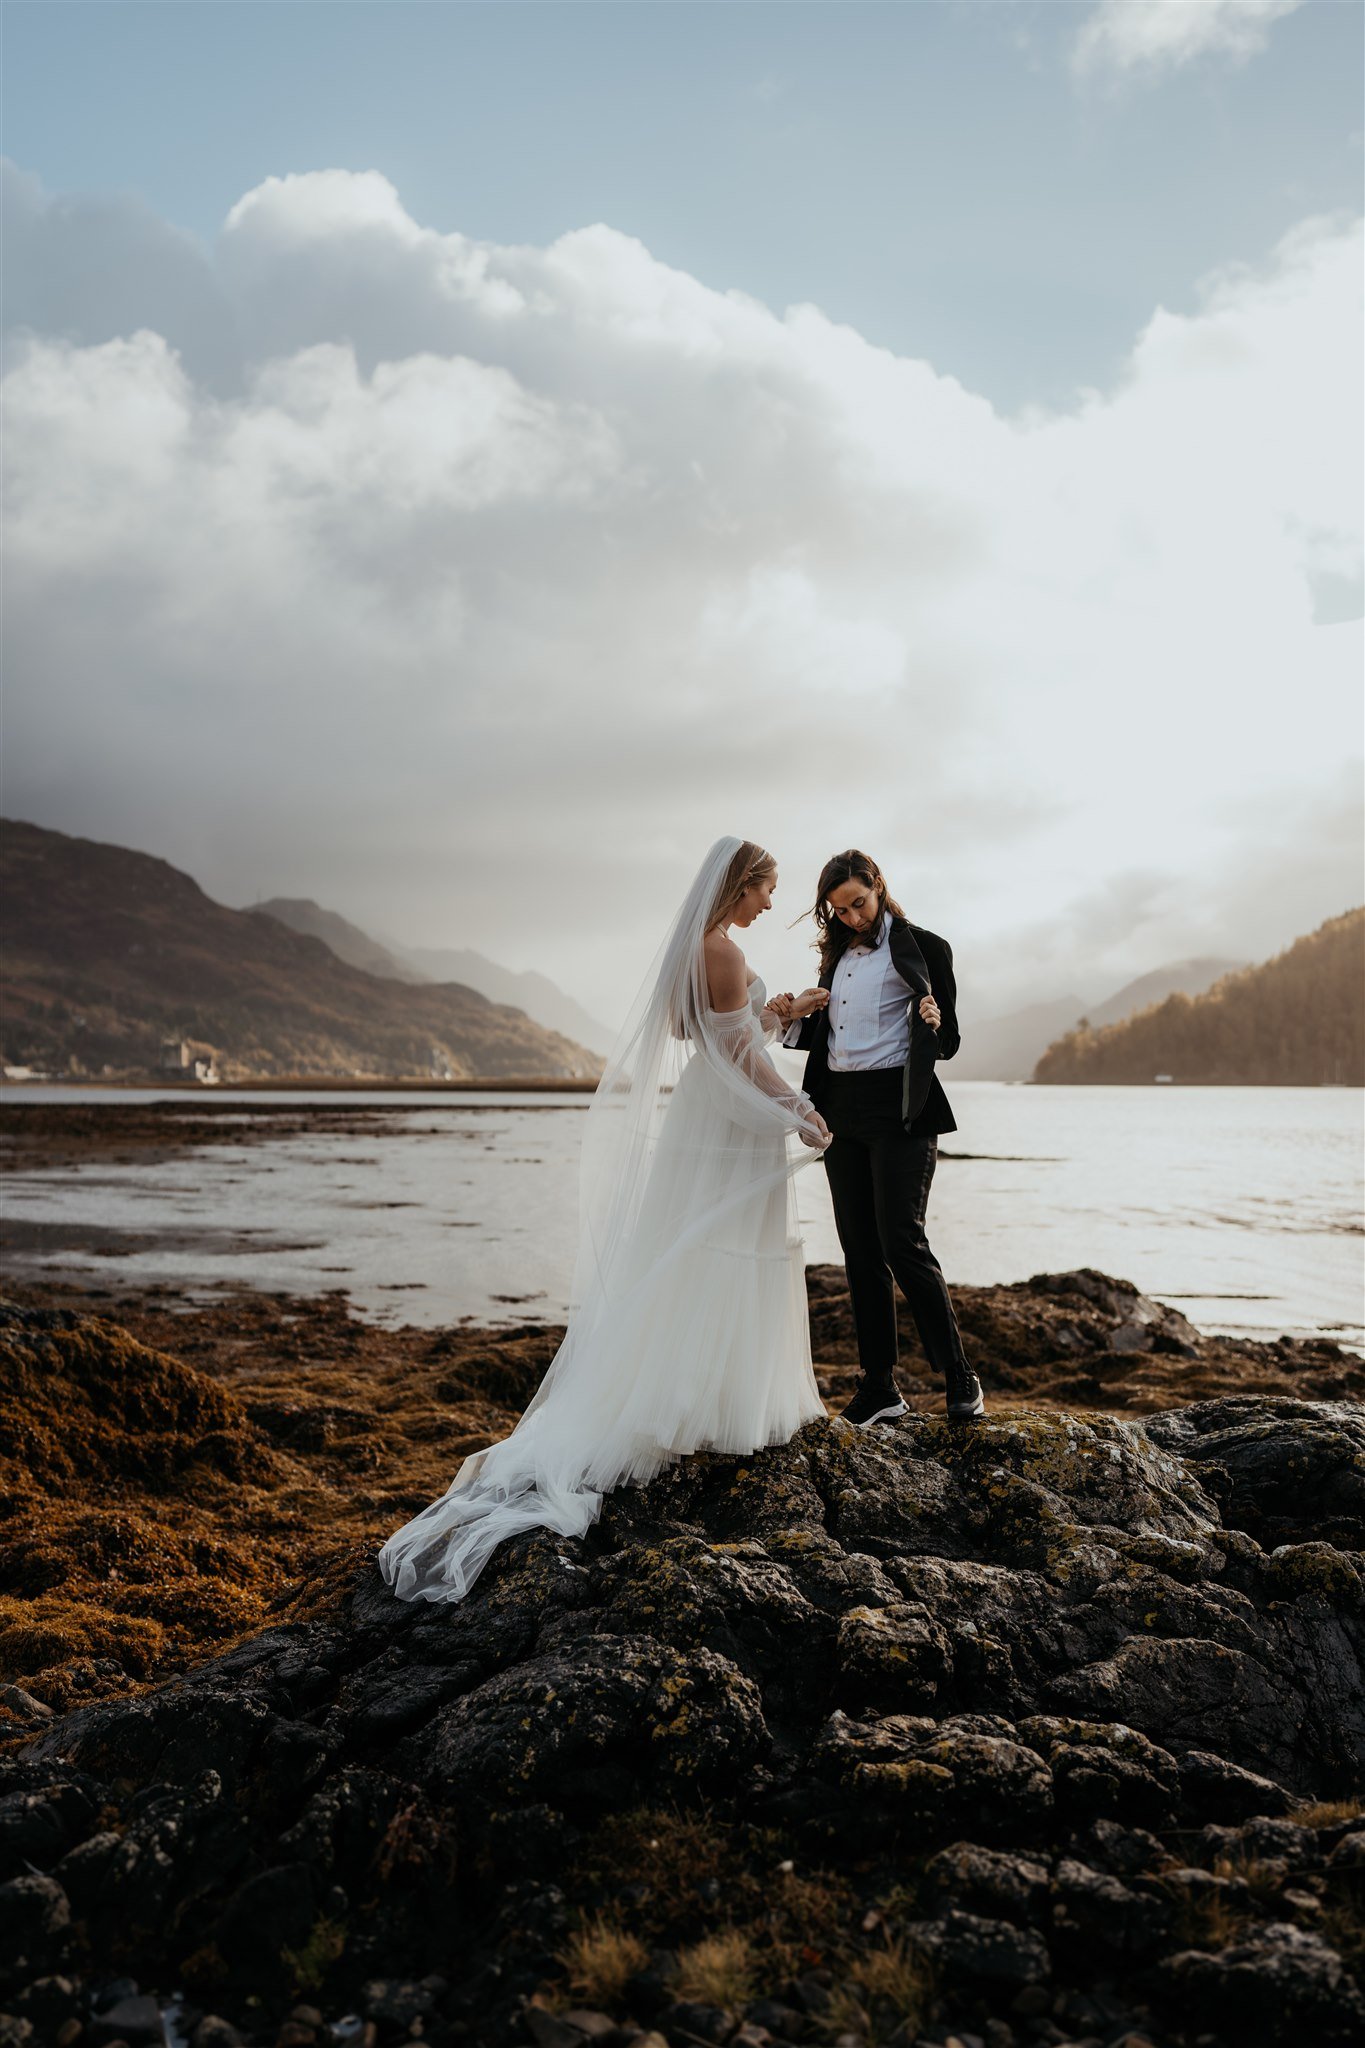 Brides admire elopement attire details after first look on the Isle of Skye